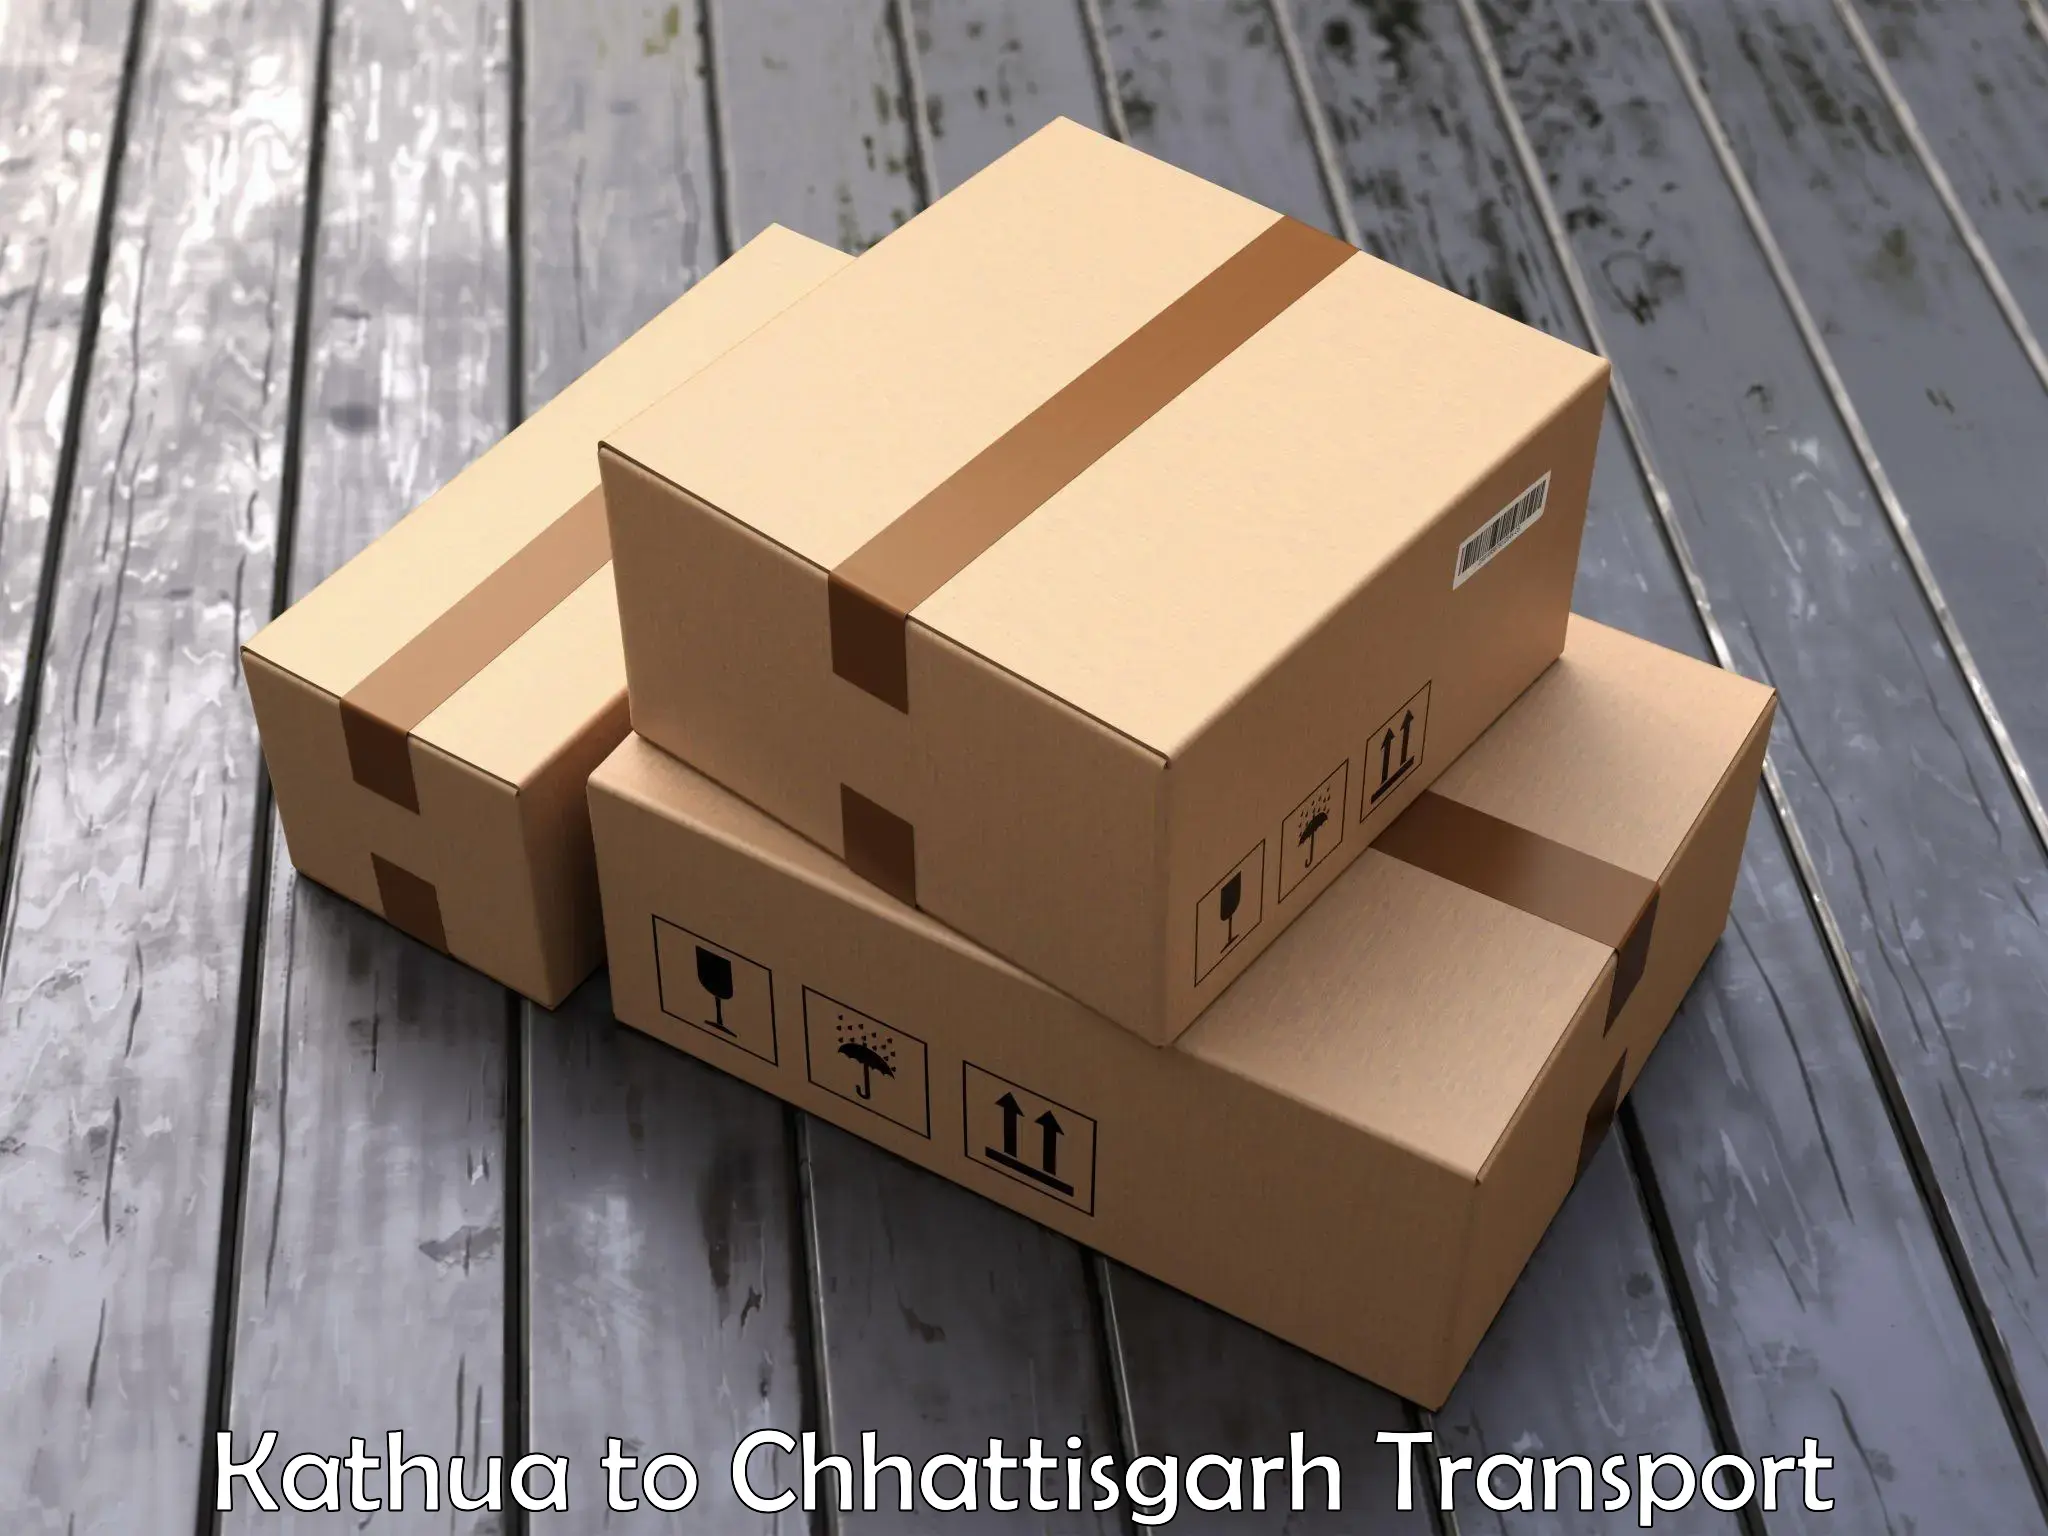 Truck transport companies in India Kathua to Patan Durg